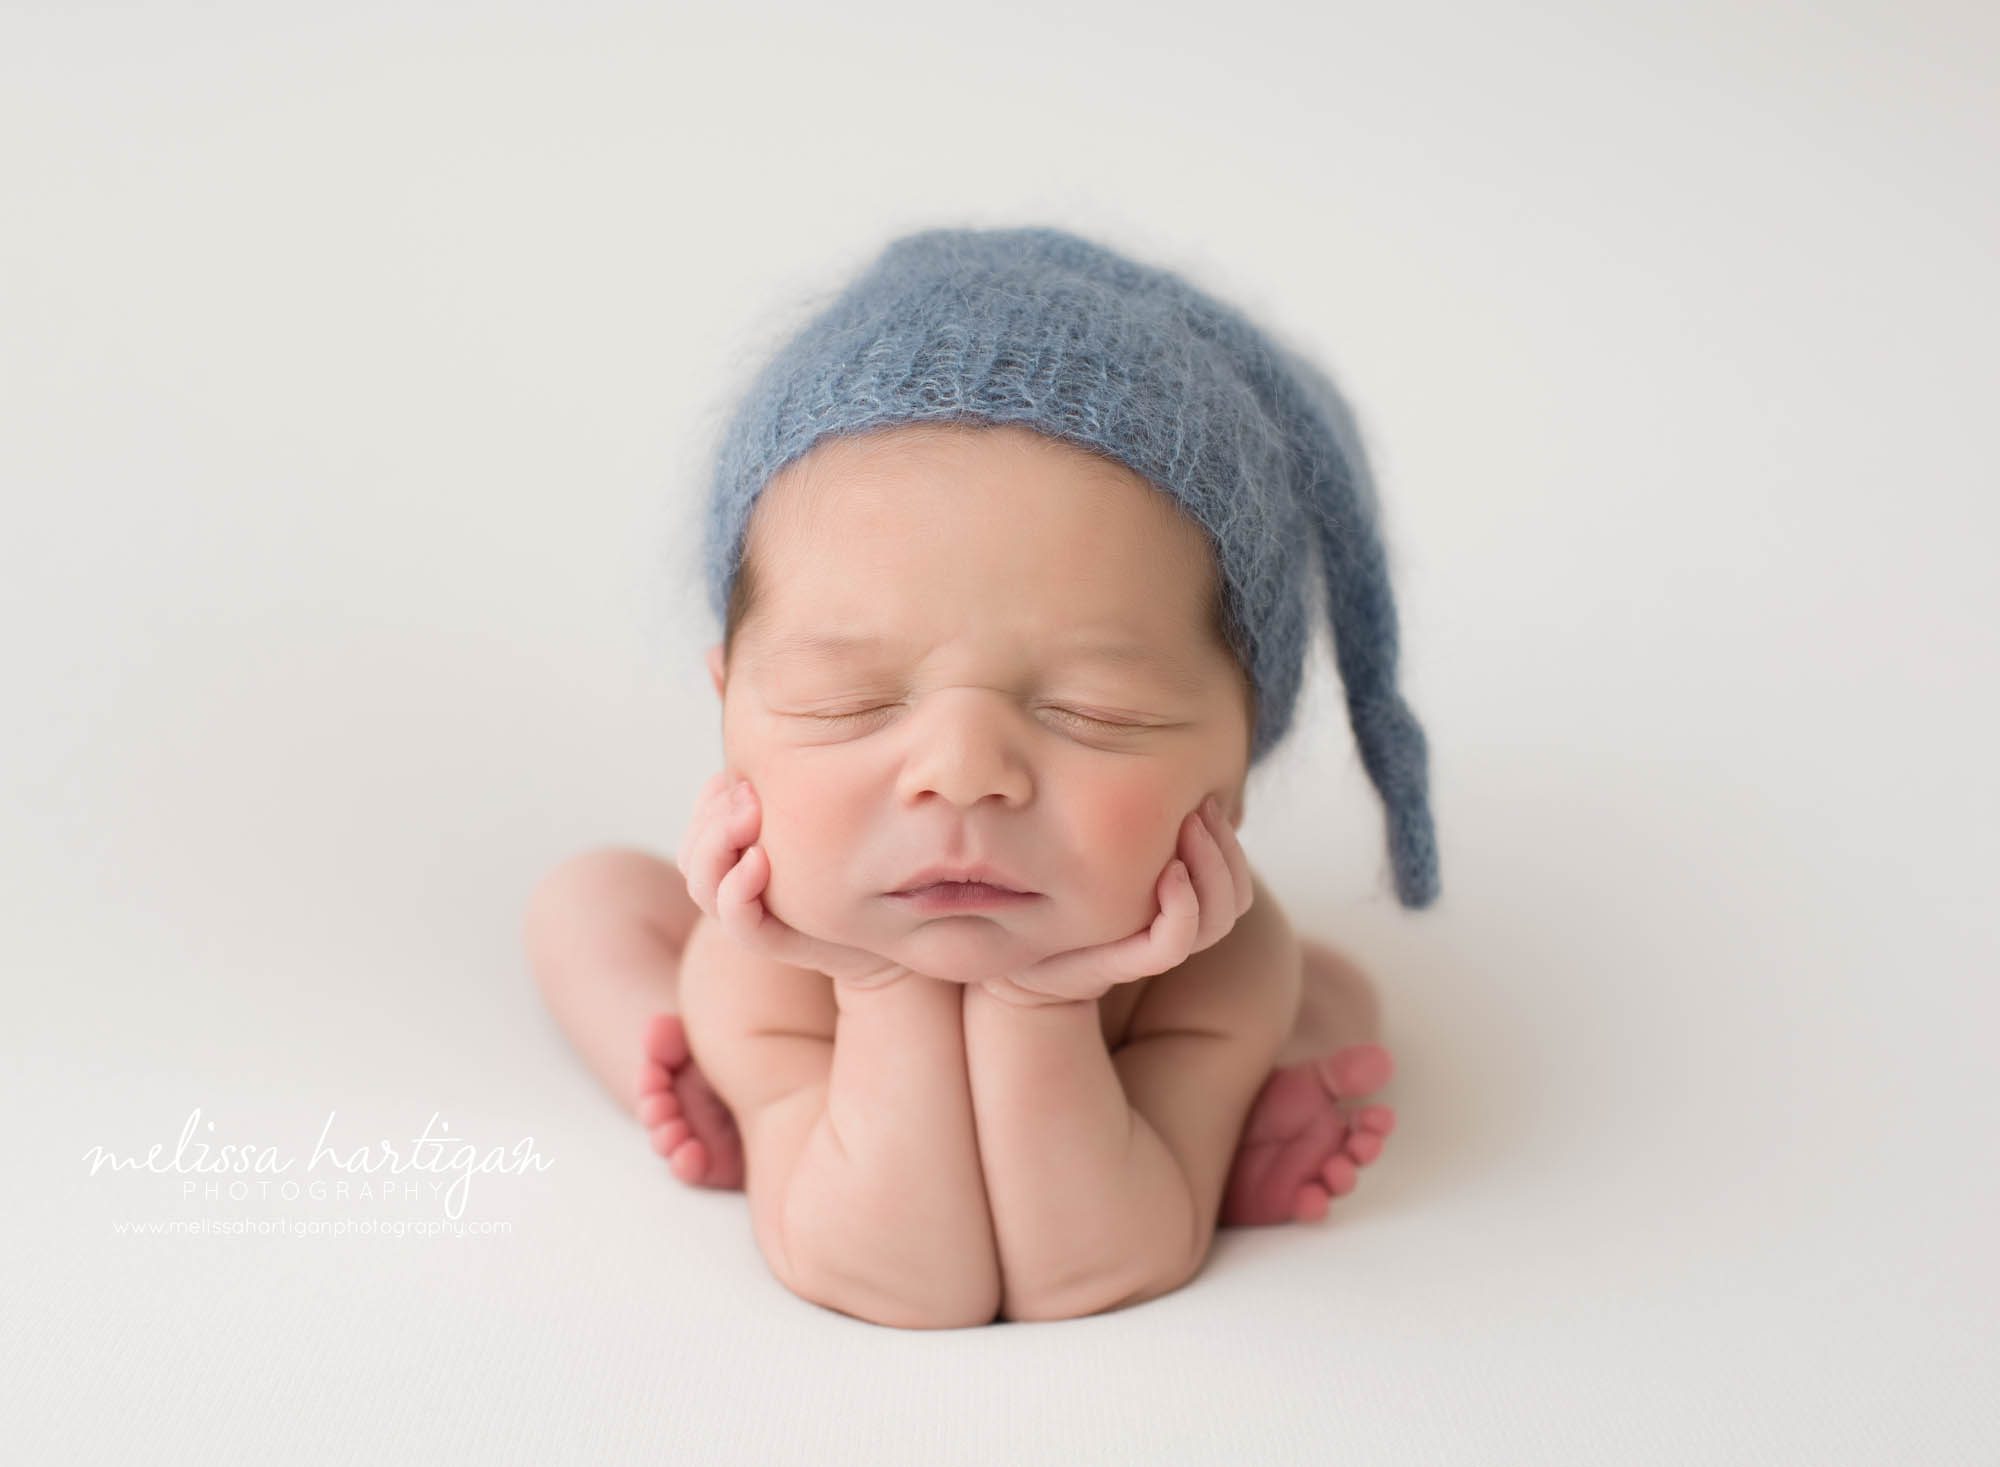 Newborn baby boy posed in froggy pose with blue knitted sleepy cap